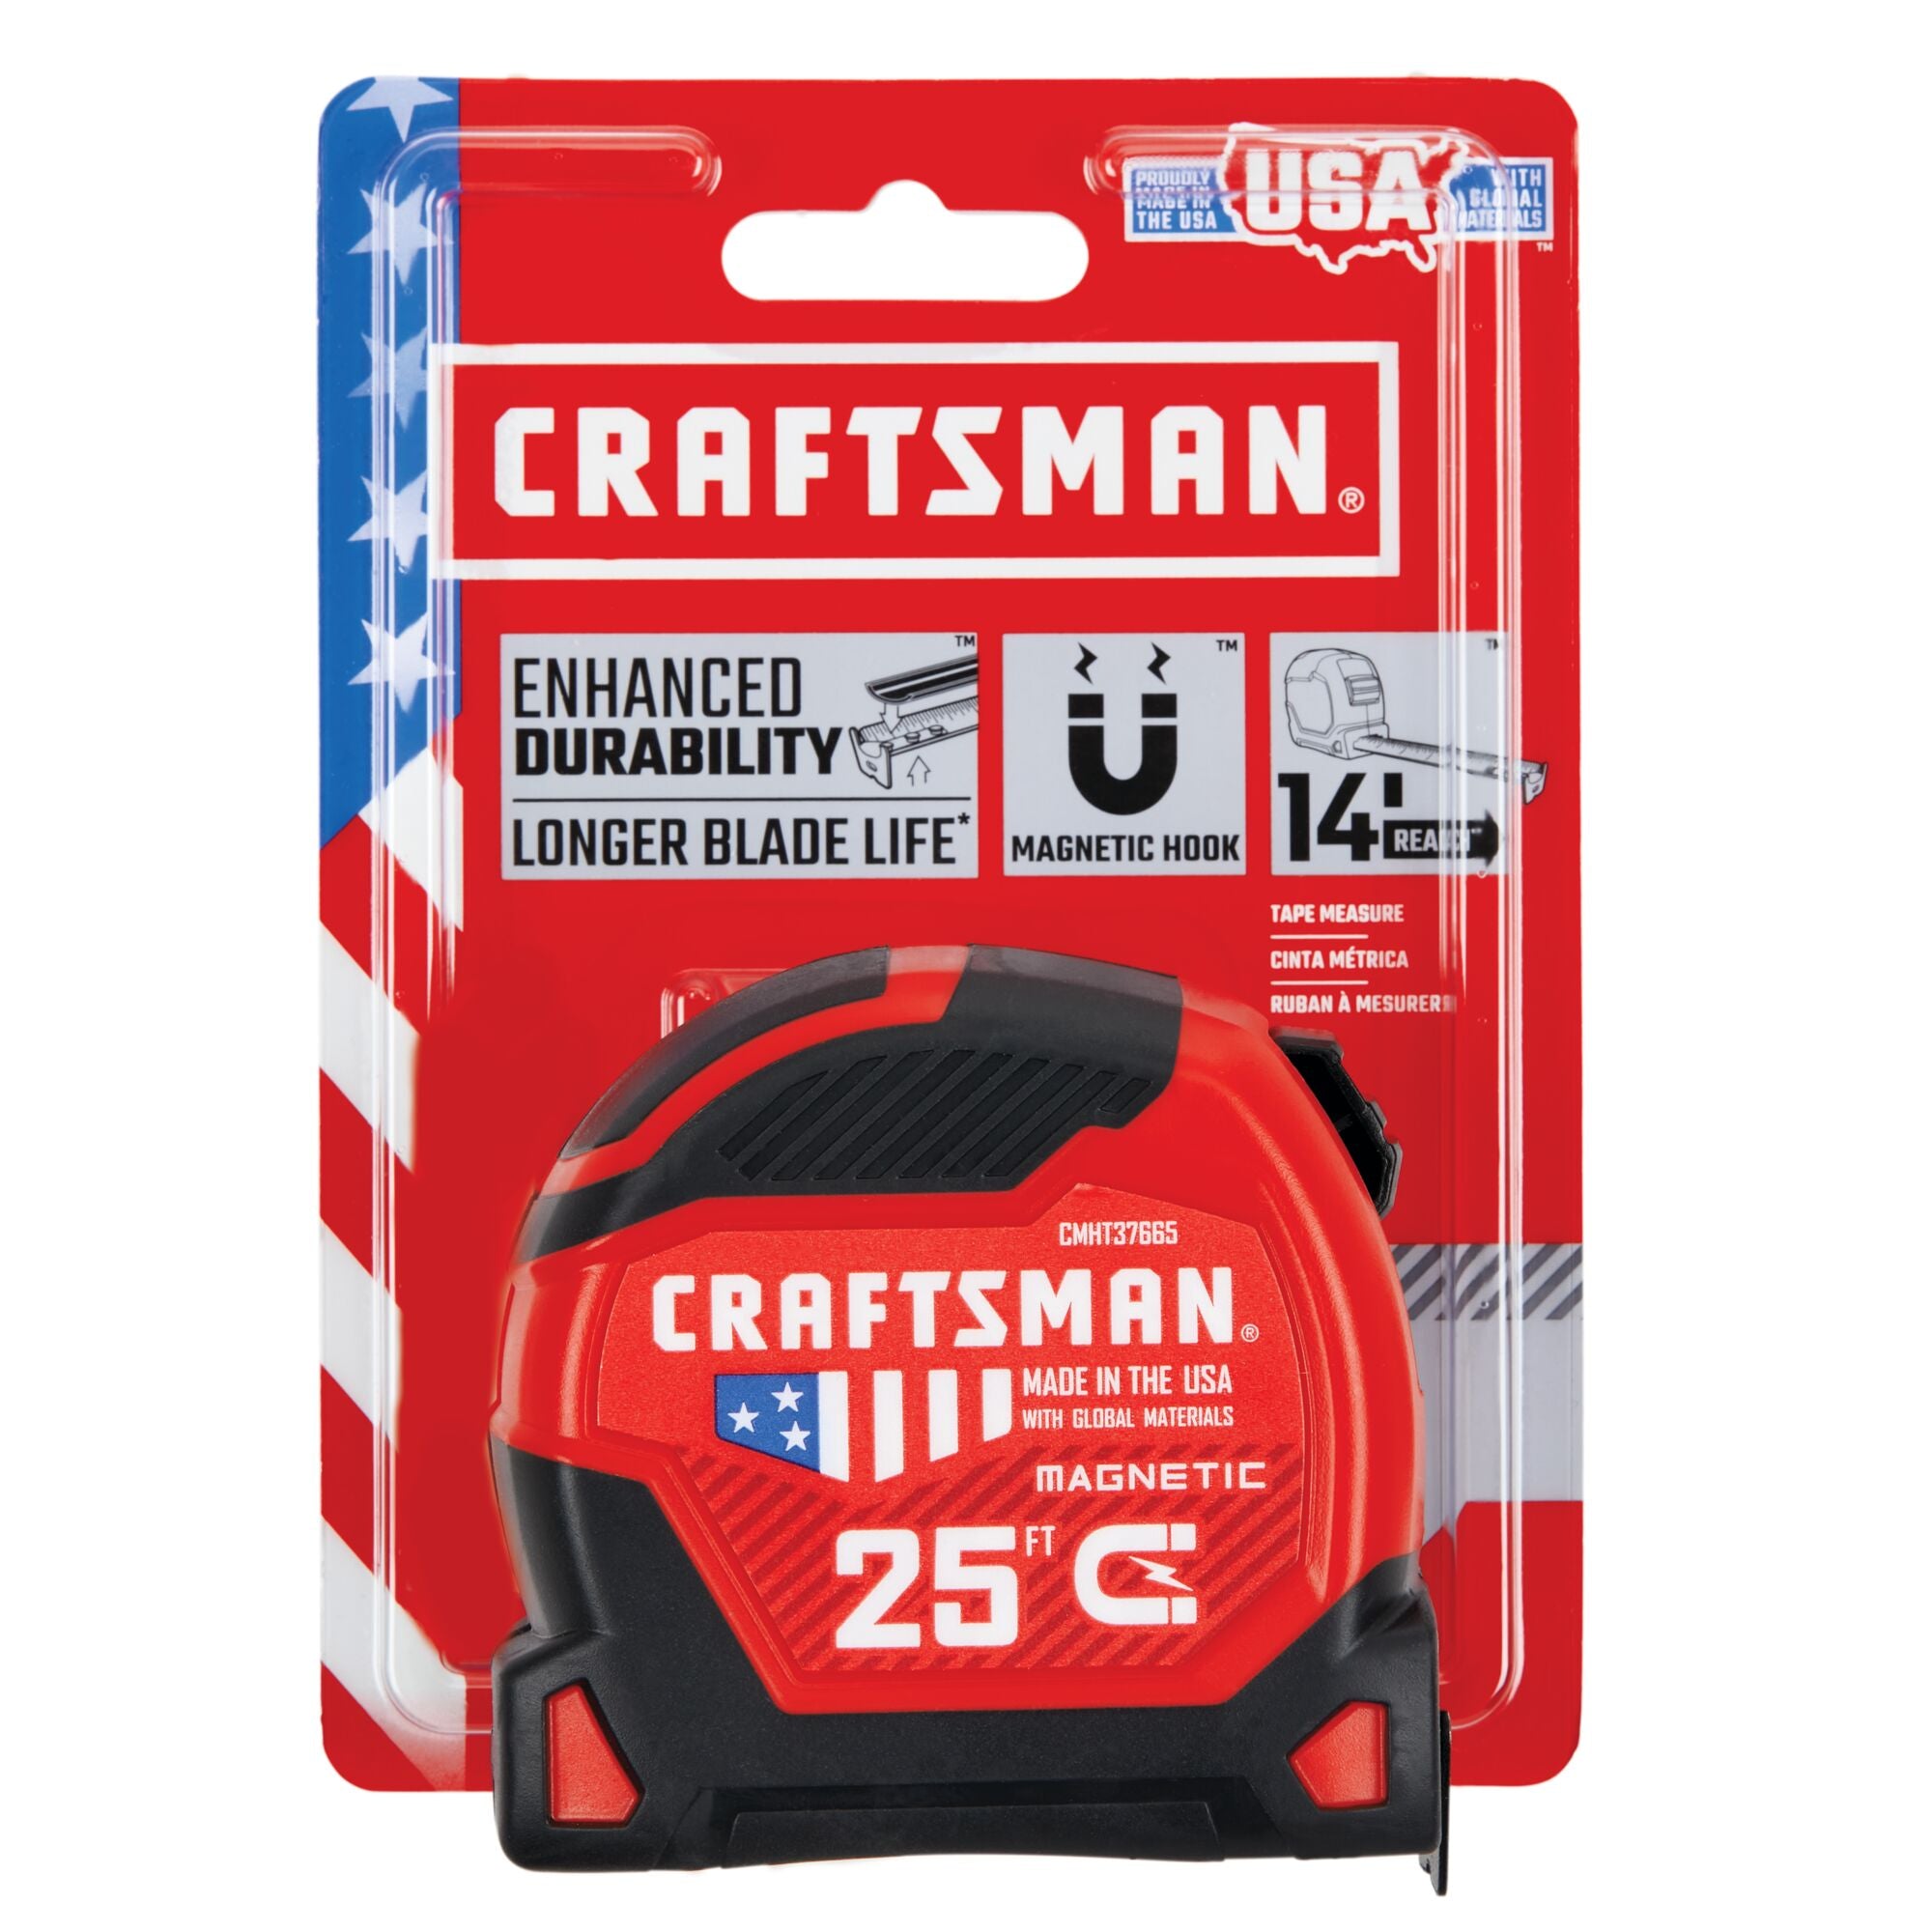 Craftsman Tape Measure, 25-Foot (CMHT37365S) and similar items